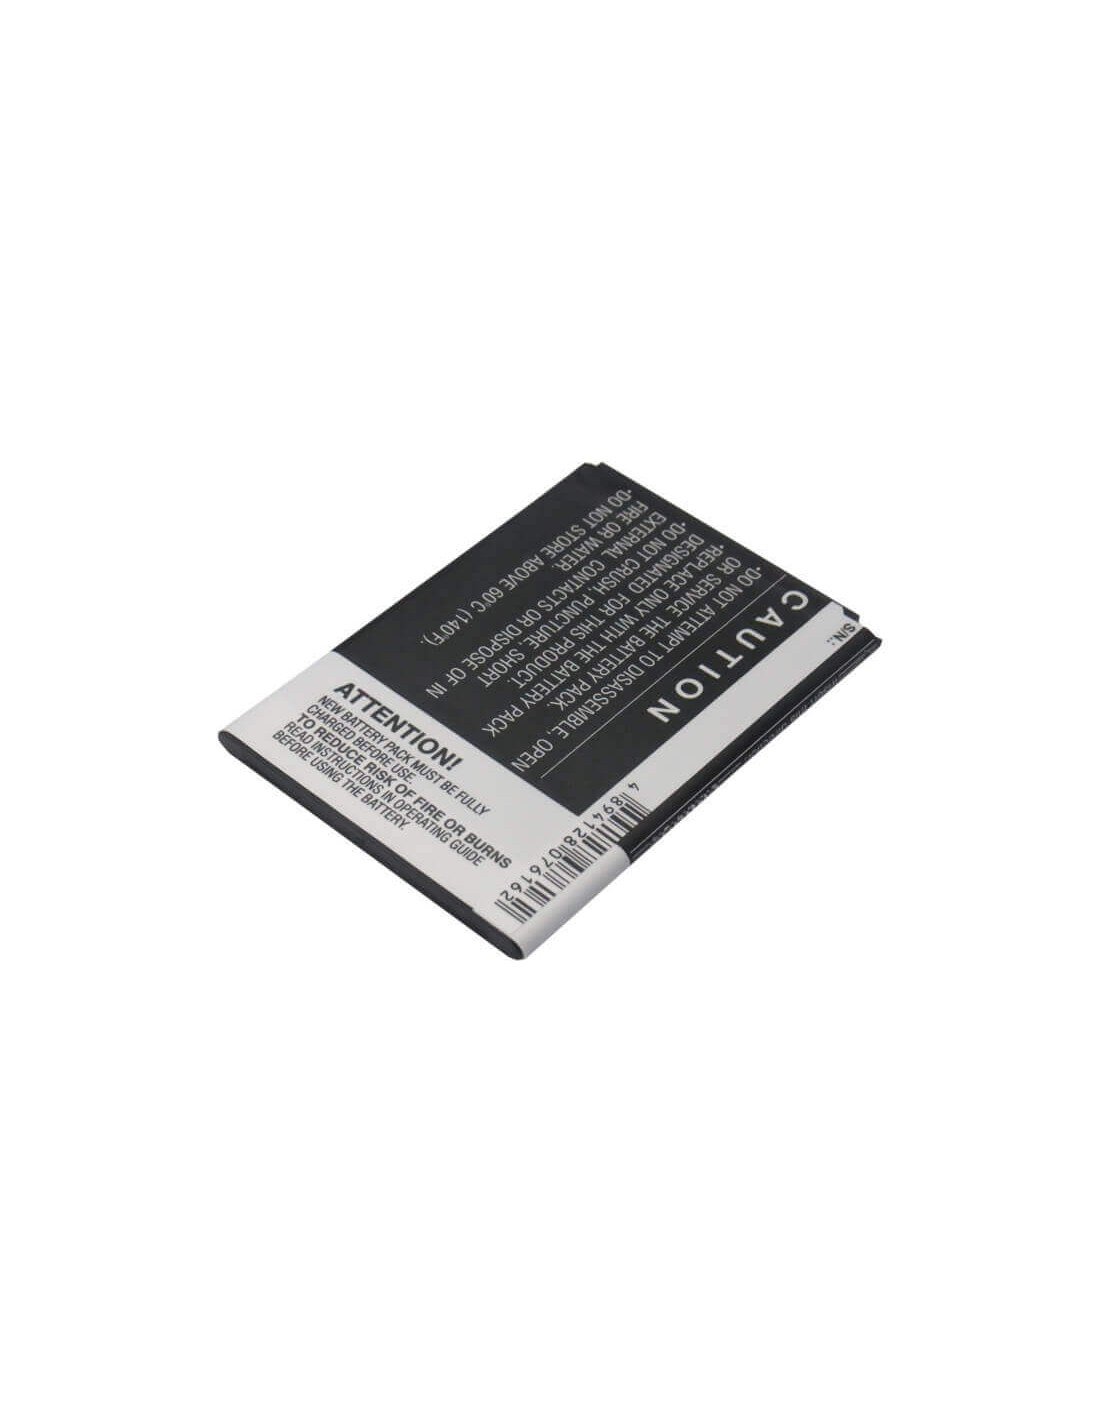 Battery for Samsung GT-i9190, Galaxy S4 Mini, GT-i9195 NFC support 3.7V, 1900mAh - 7.03Wh